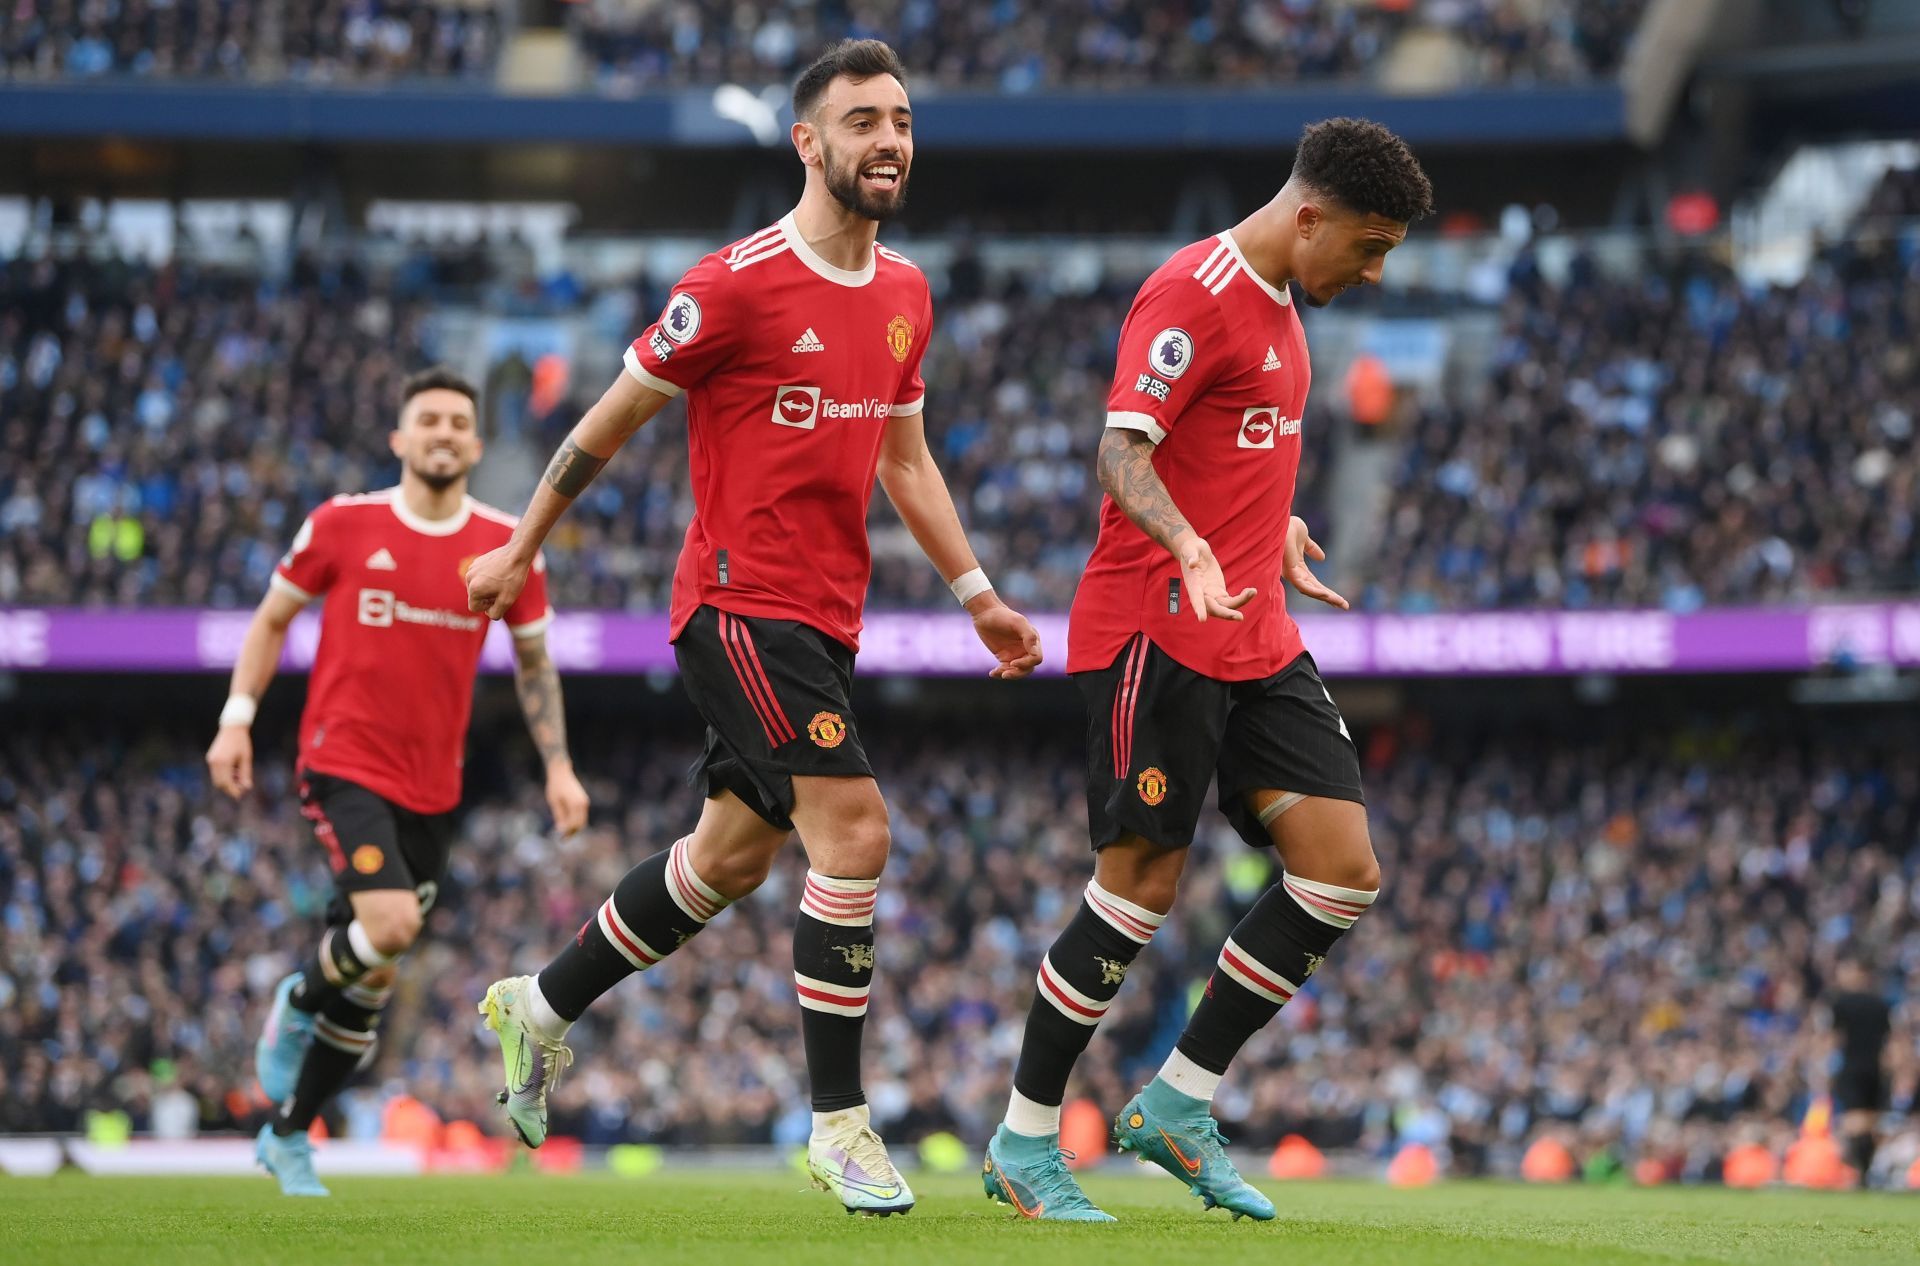 Manchester United are struggling to qualify for the next season of the Champions League